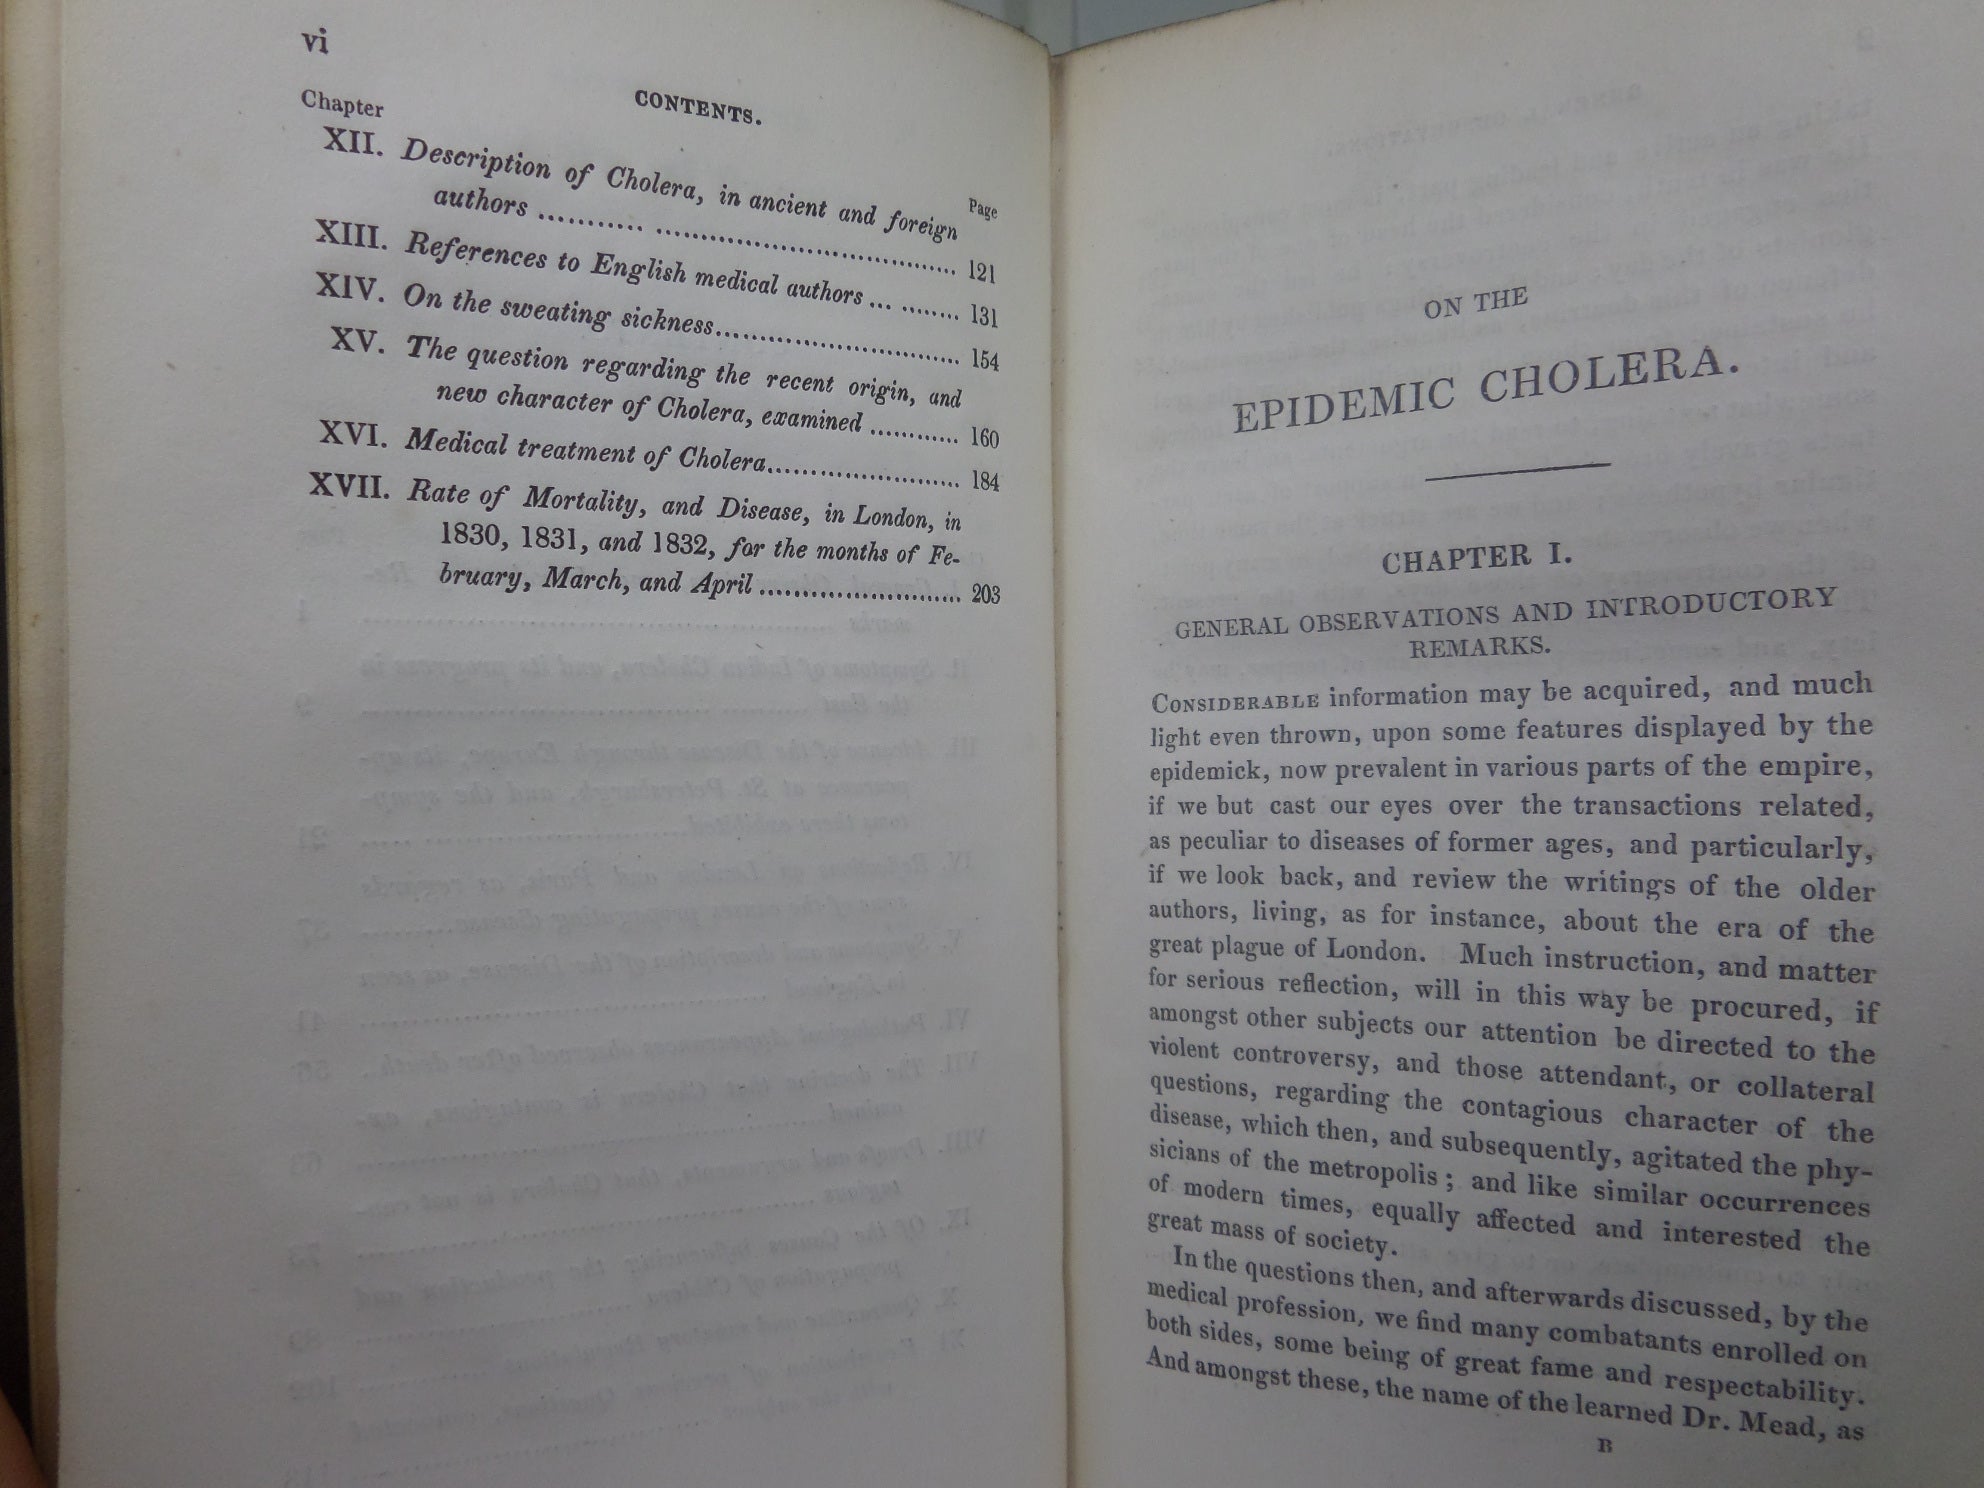 AN ESSAY ON THE EPIDEMIC CHOLERA BY JOHN WEBSTER 1832 FIRST EDITION